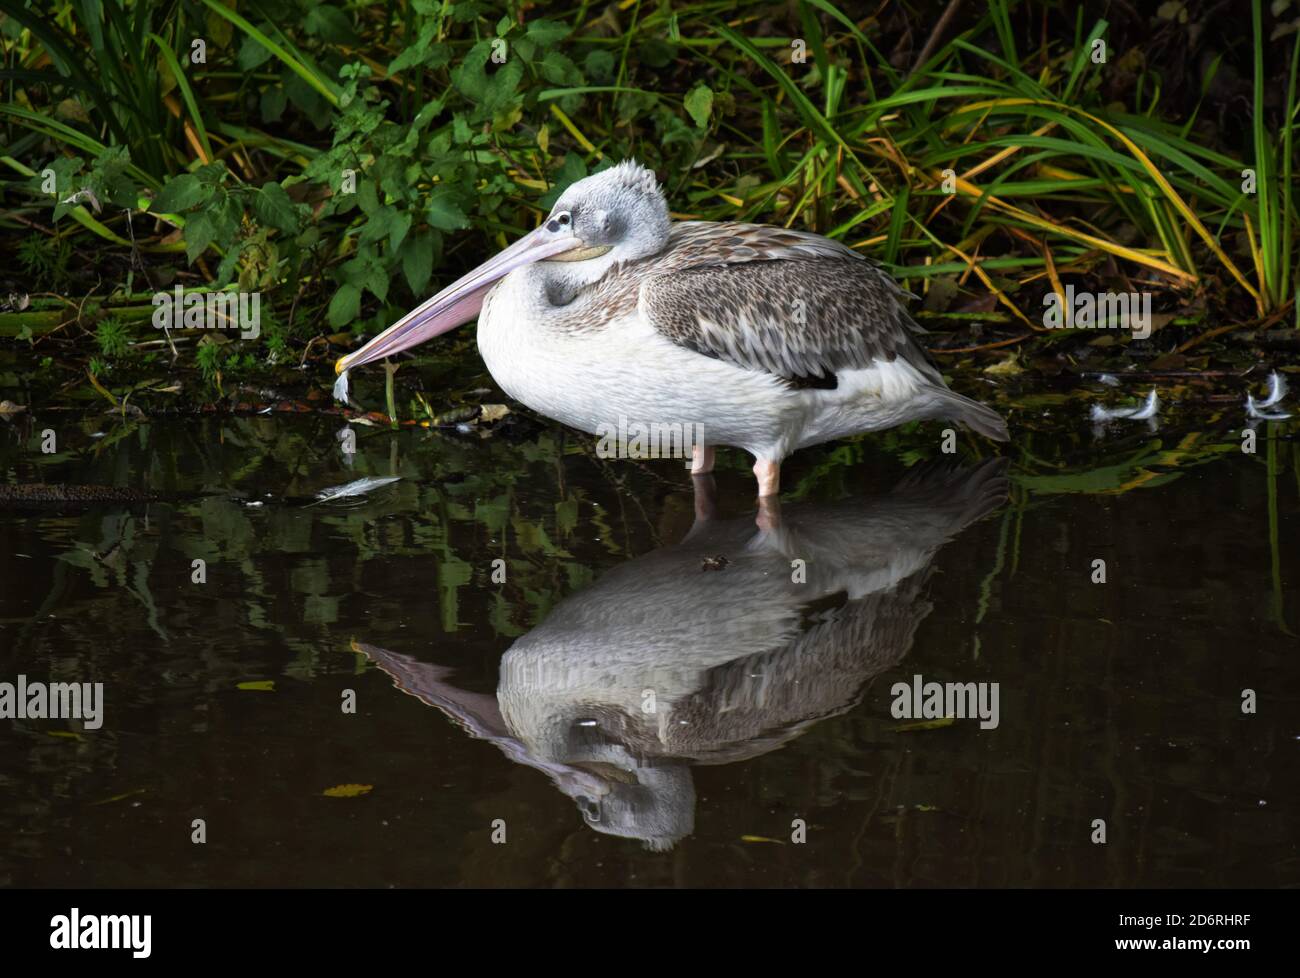 pelican standing in water with reflection Stock Photo